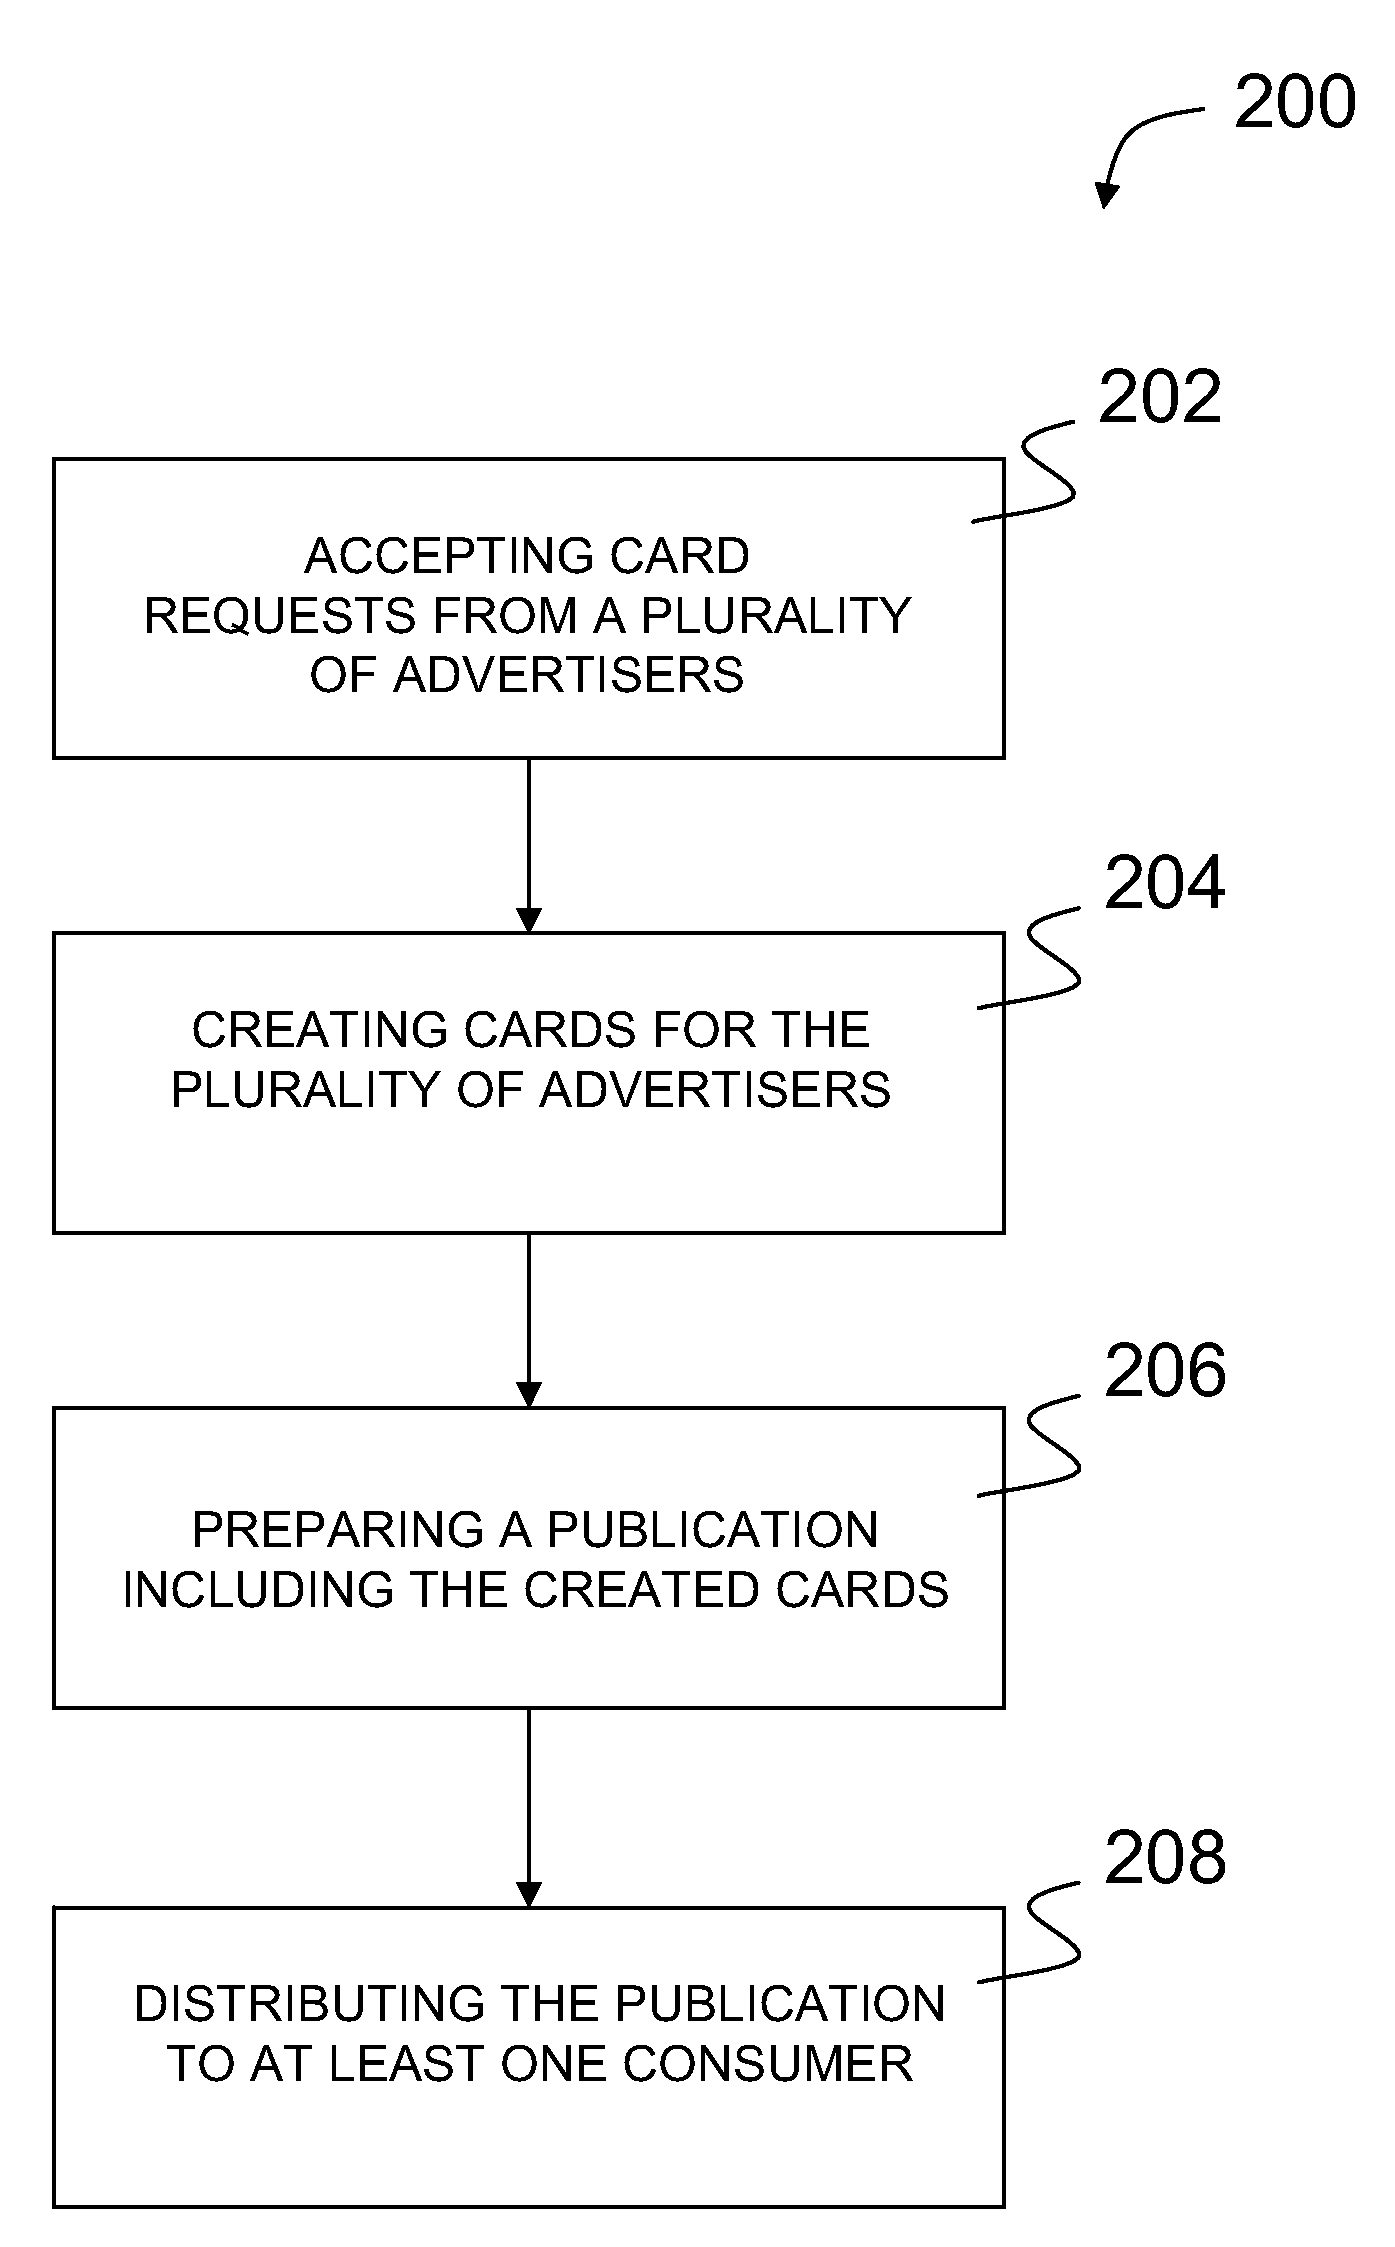 Systems and methods for providing consolidated card delivery for a plurality of advertisers